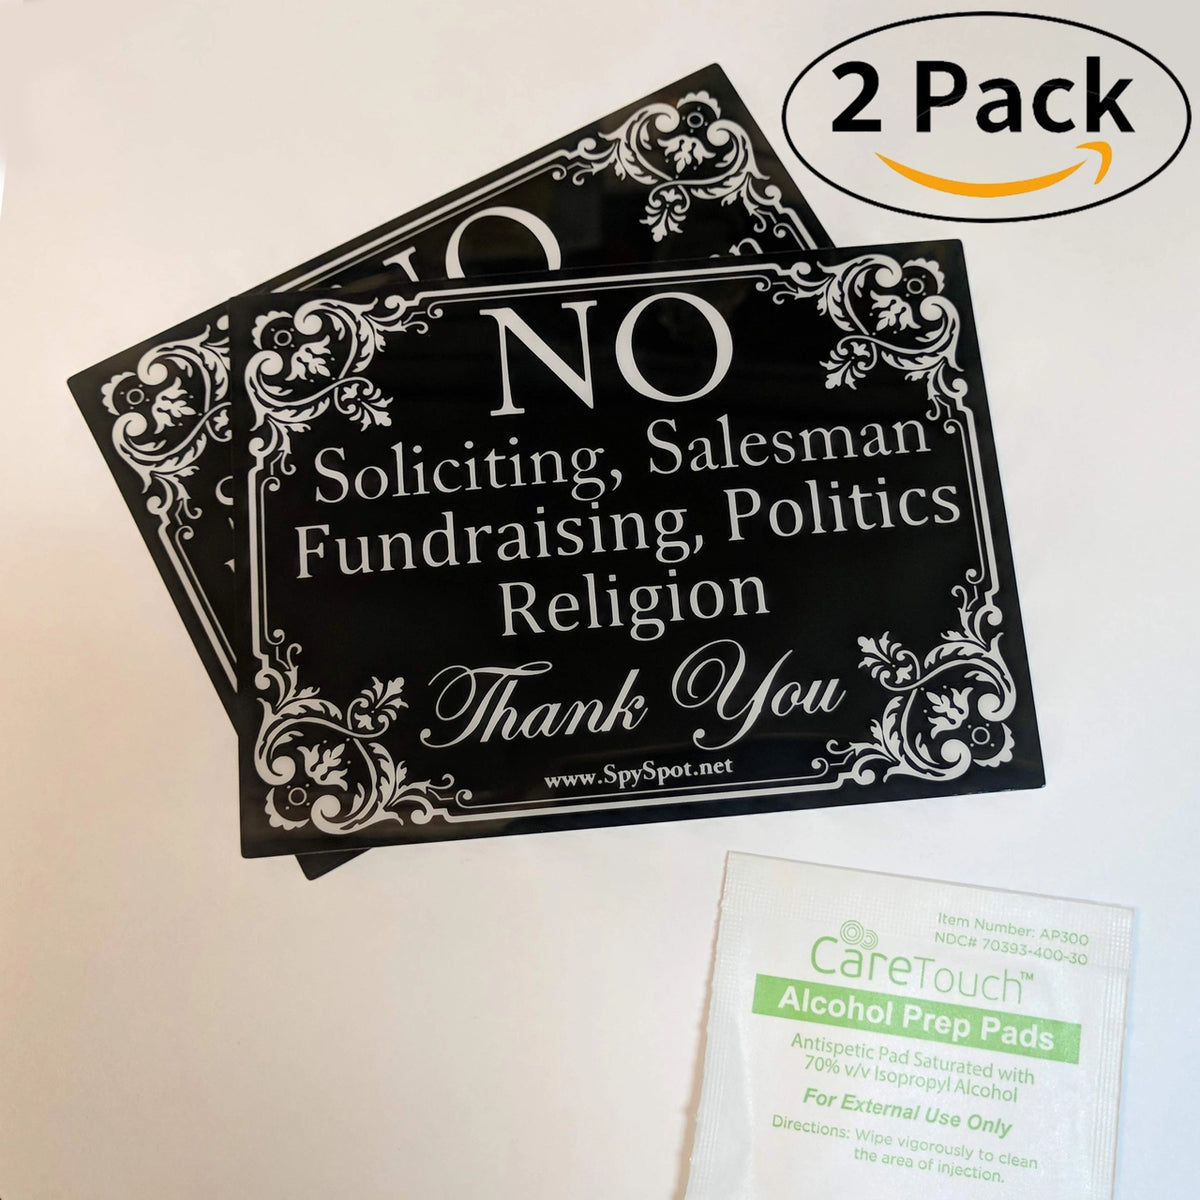 2 Pack of No Soliciting Vinyl Decal Stickers 4" x 3"